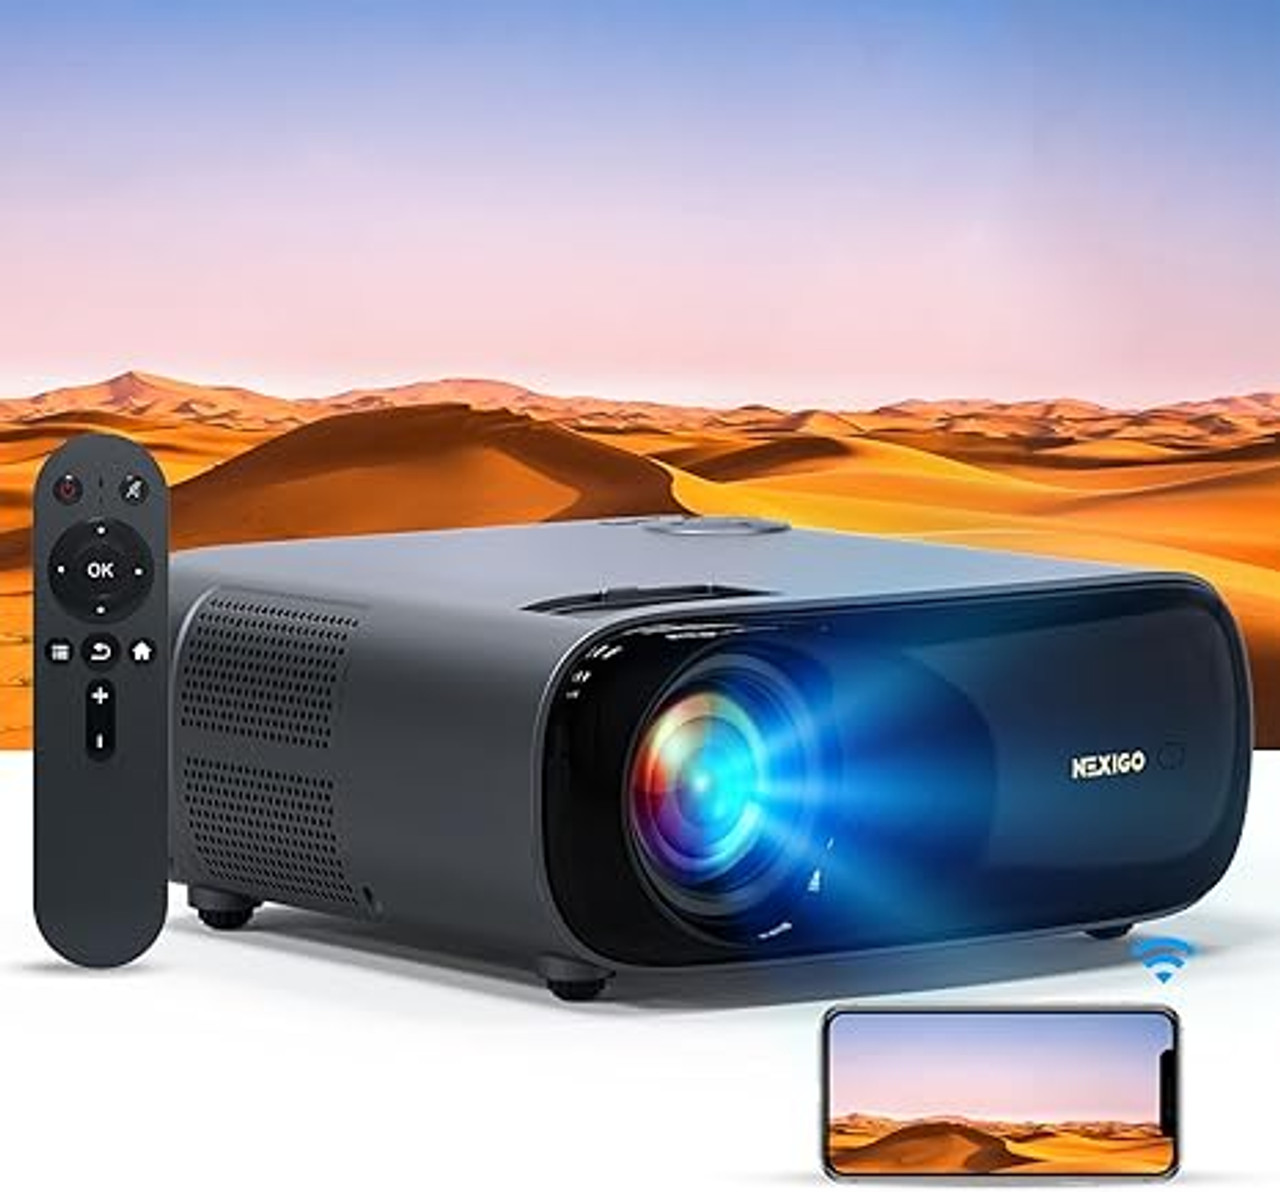  XGIMI Horizon Pro 4K Projector, 1500 ISO Lumens, Android TV  10.0 Movie Projector with Integrated Harman Kardon Speakers, Auto Keystone  Screen Adaption Home Theater Projector : Electronics